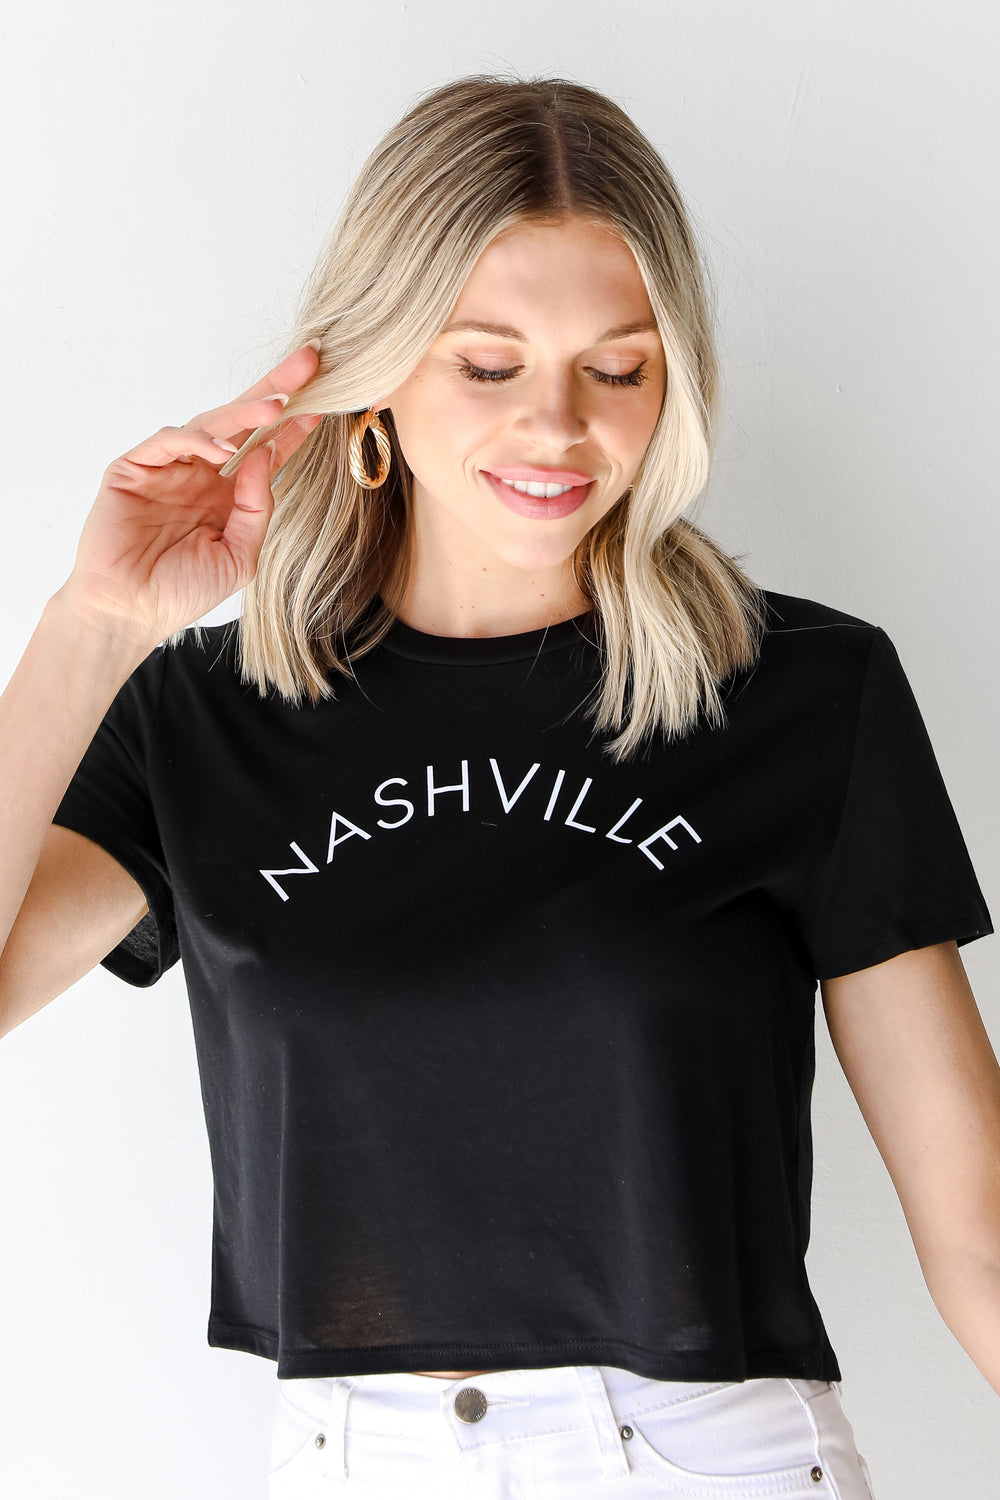 Nashville Cropped Tee from dress up